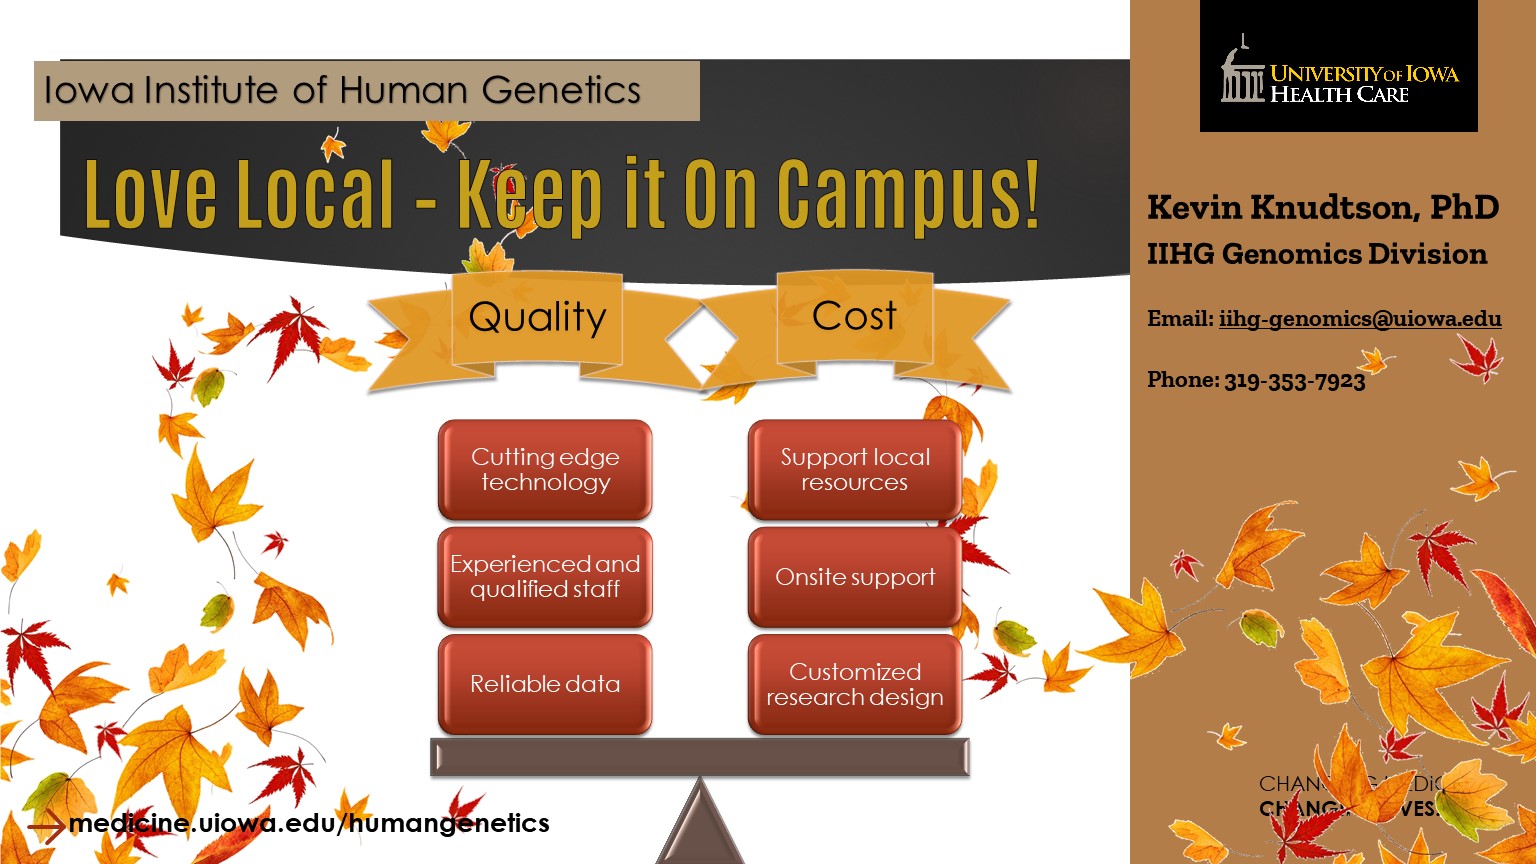 Cost vs. Quality - Love Local! Keep it on Campus!